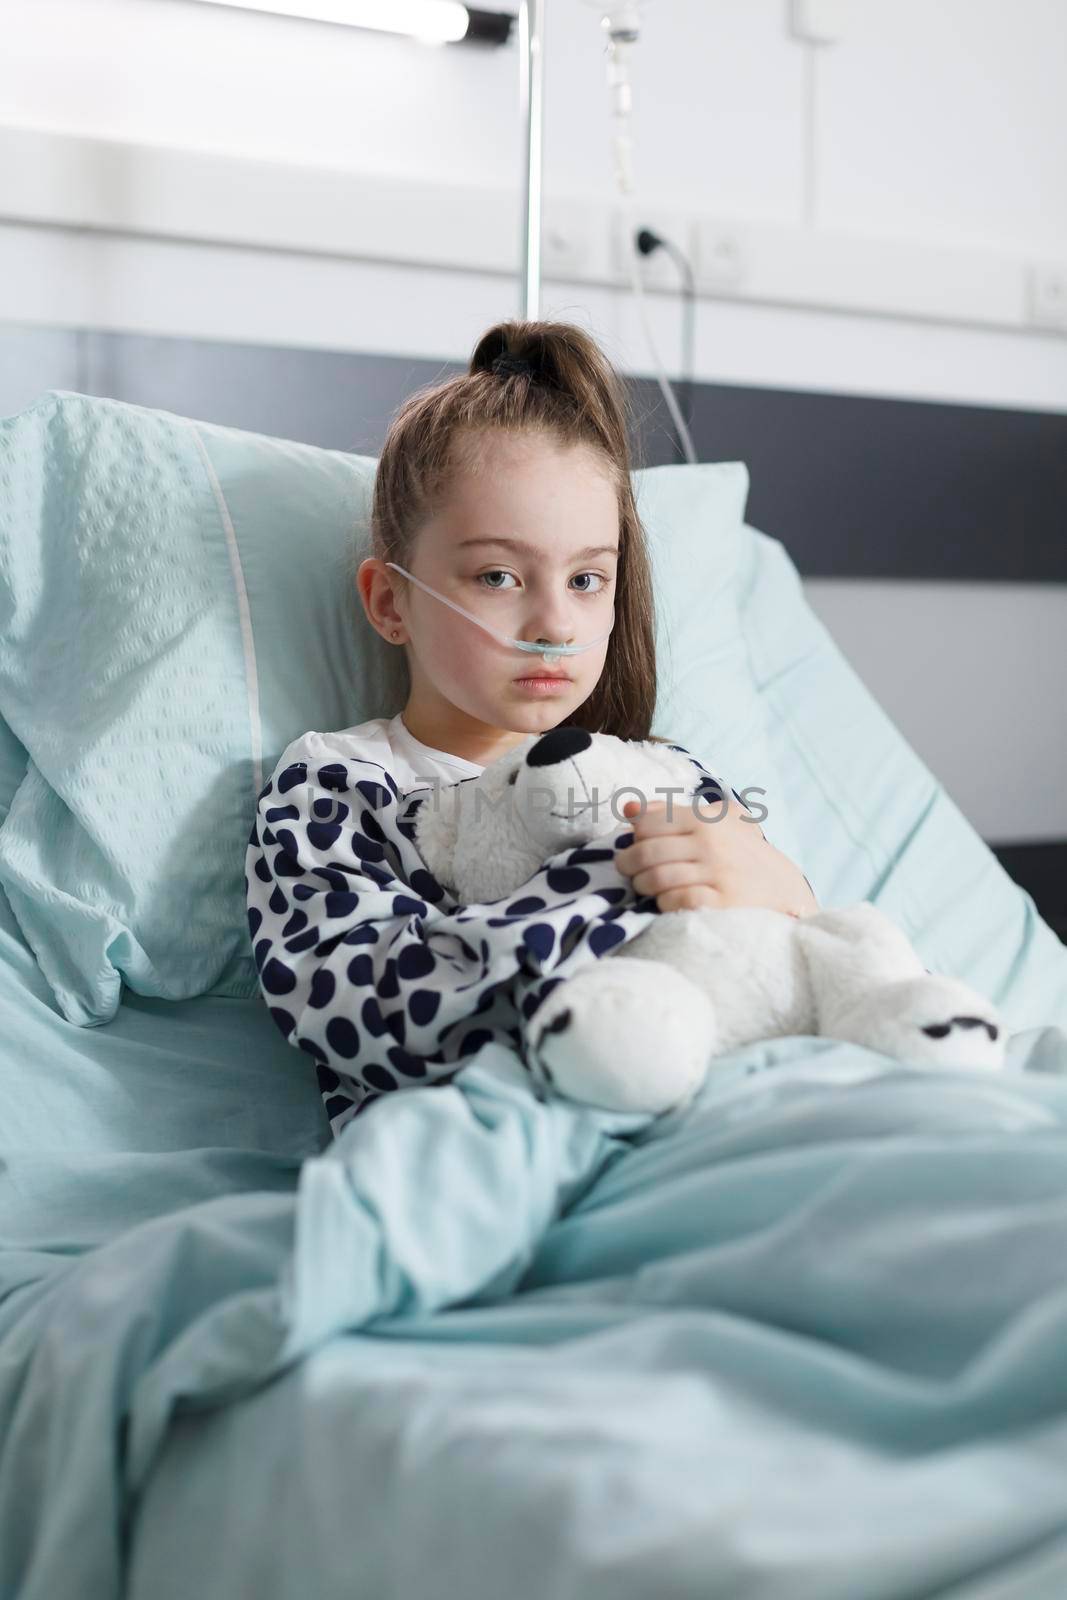 Unhealthy child in healthcare pediatric hospital patients treatment ward room while looking at camera. Sick kid holding teddybear and wearing oxygen tube while resting alone in pediatric clinic bed.